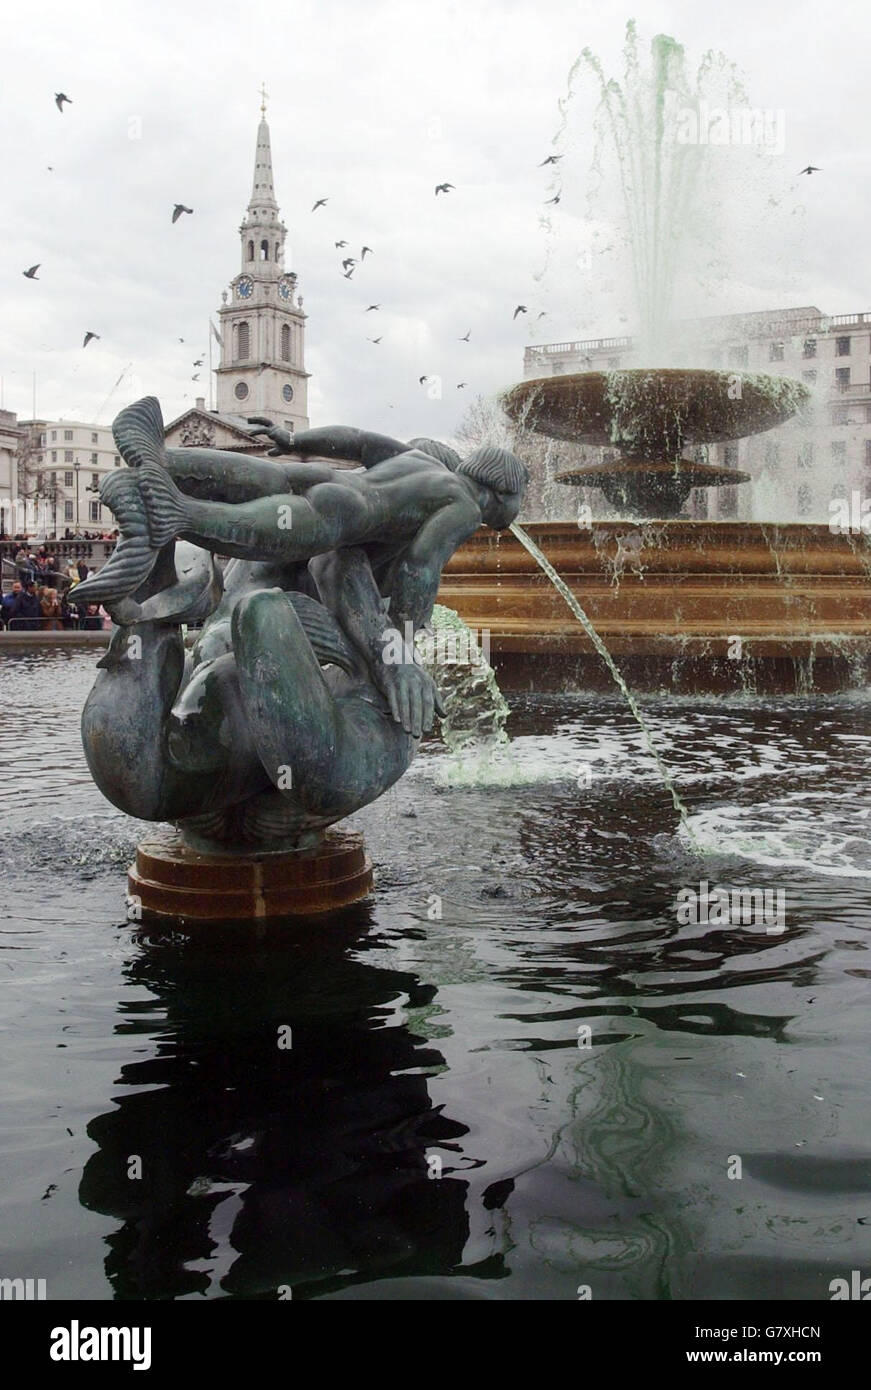 St Patrick's Parade - London. Trafalgar Sqaure, where the famous fountains have been dyed green for the St Patrick's day parade. Stock Photo